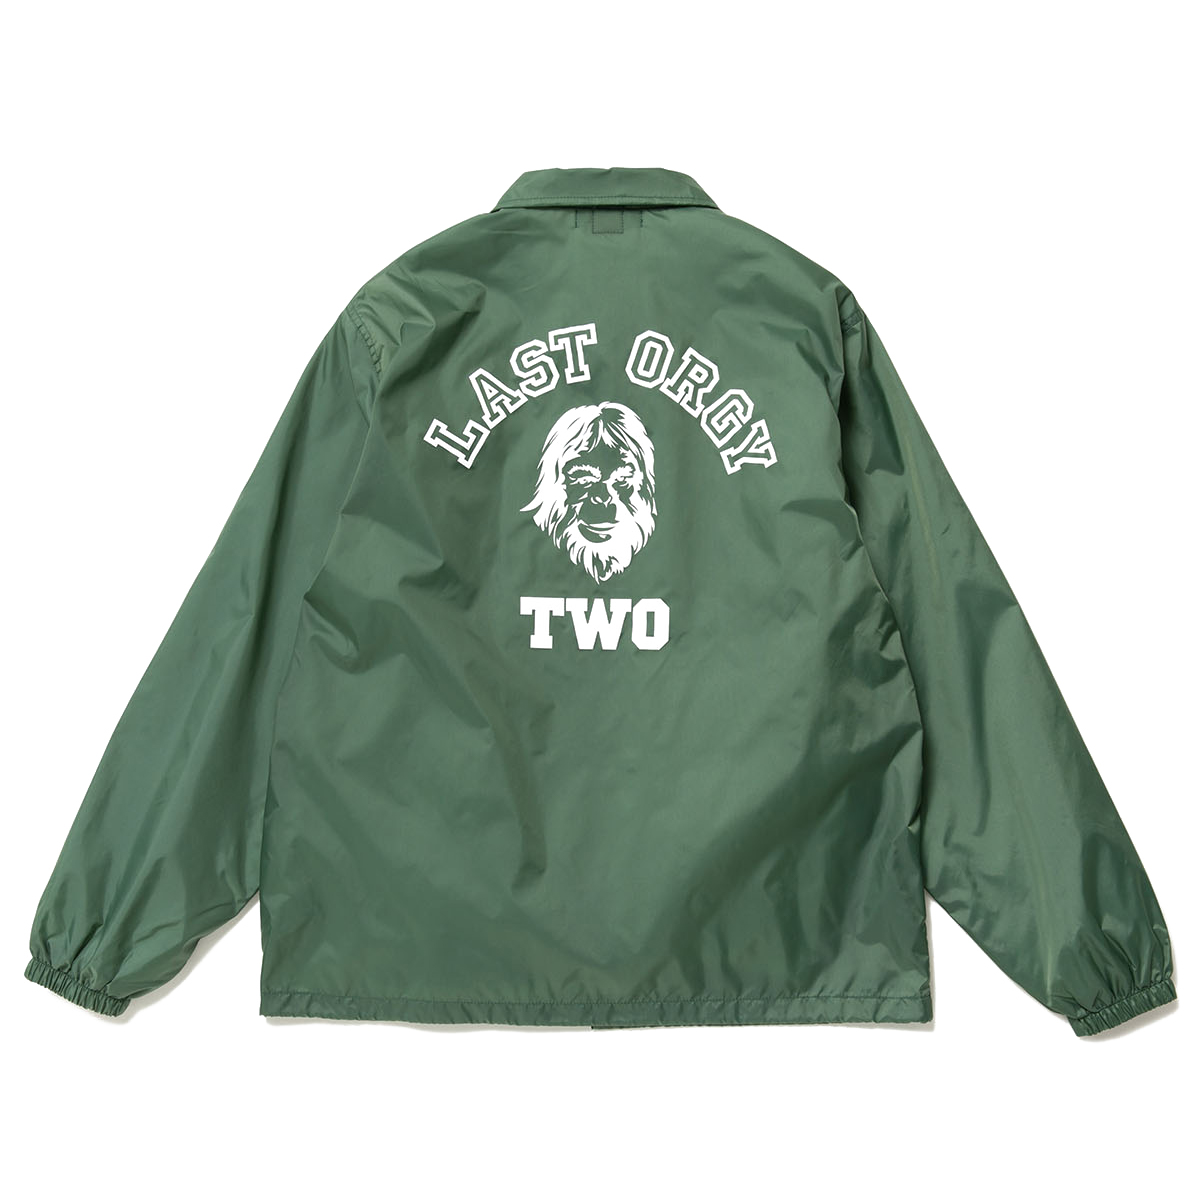 Human Made x Undercover Last Orgy 2 Coach Jacket Green